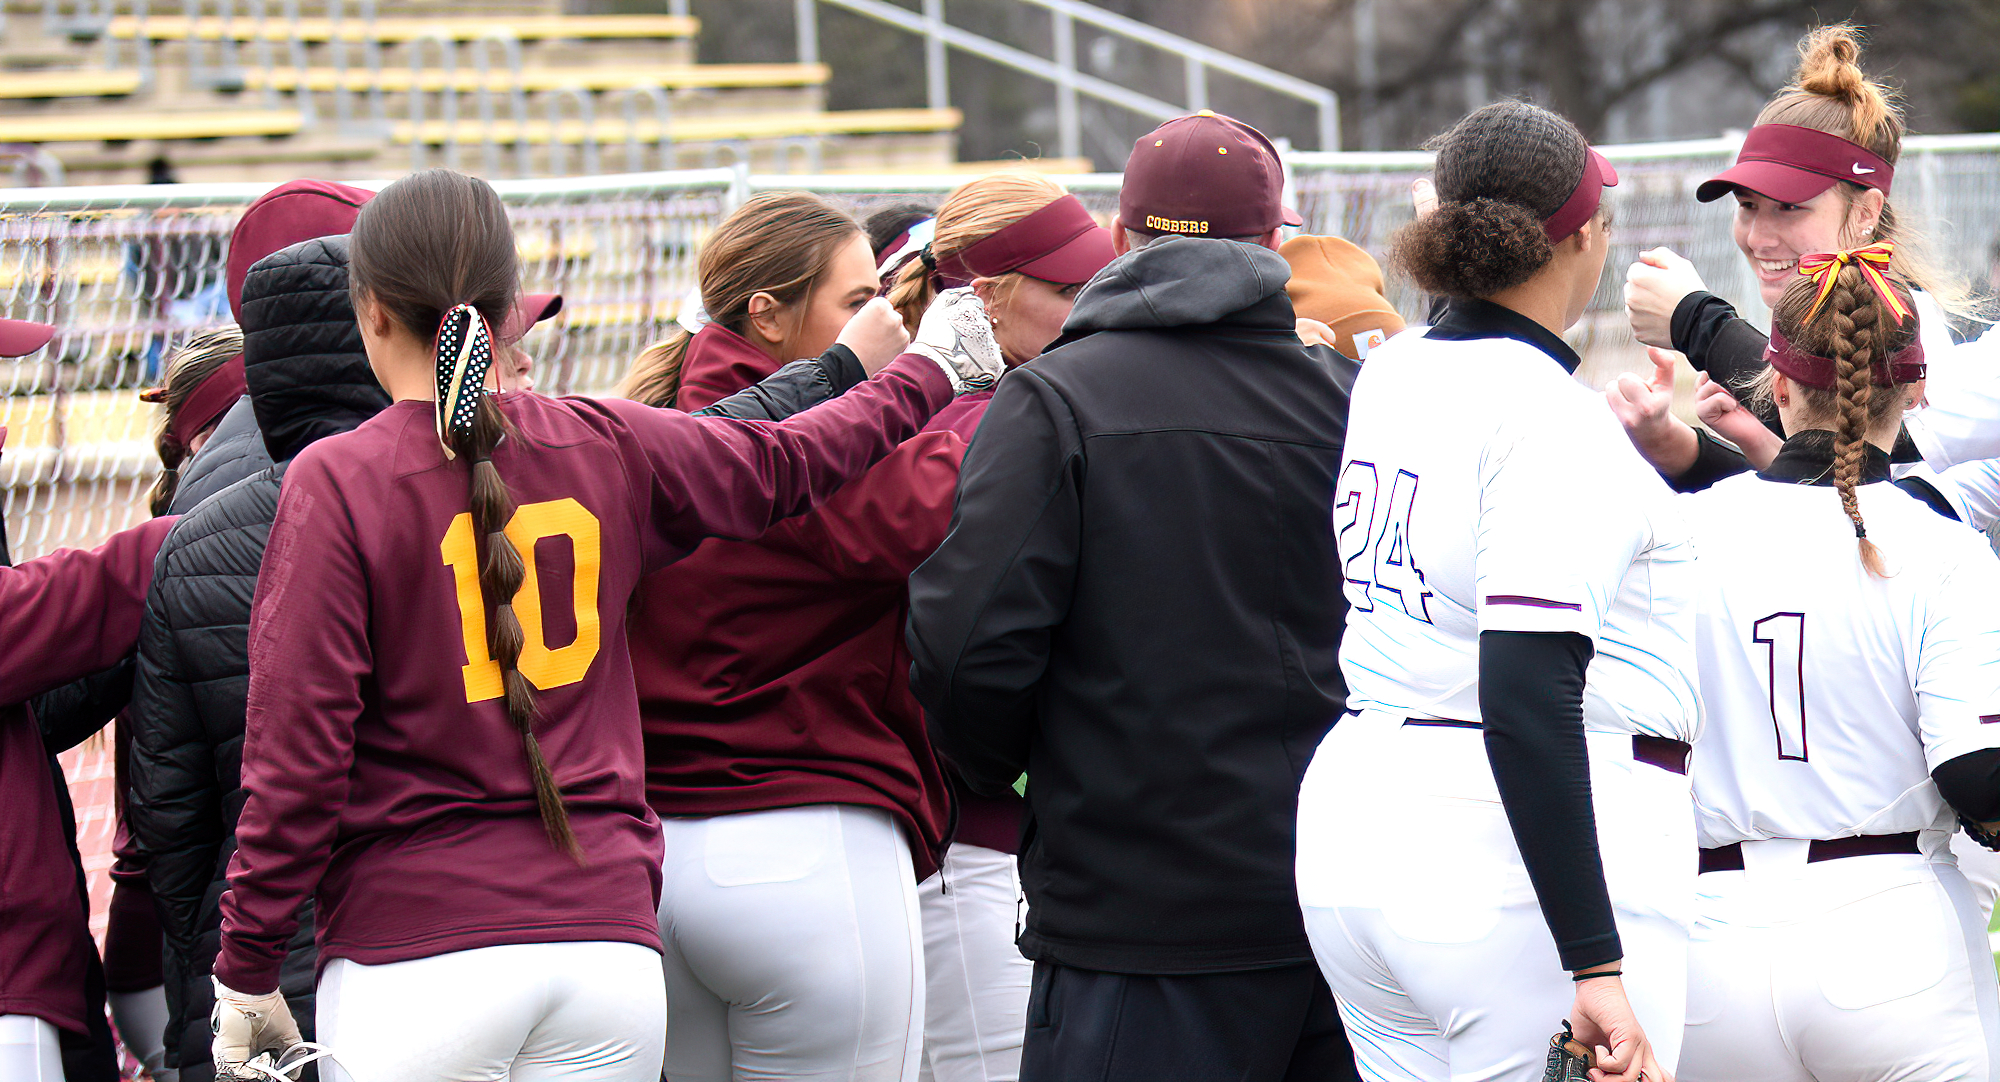 Concordia lost the opener against Gustavus, and then had leads of 1-0 and 2-1 in Game 2 before the Gusties rallied to beat the  Cobbers.